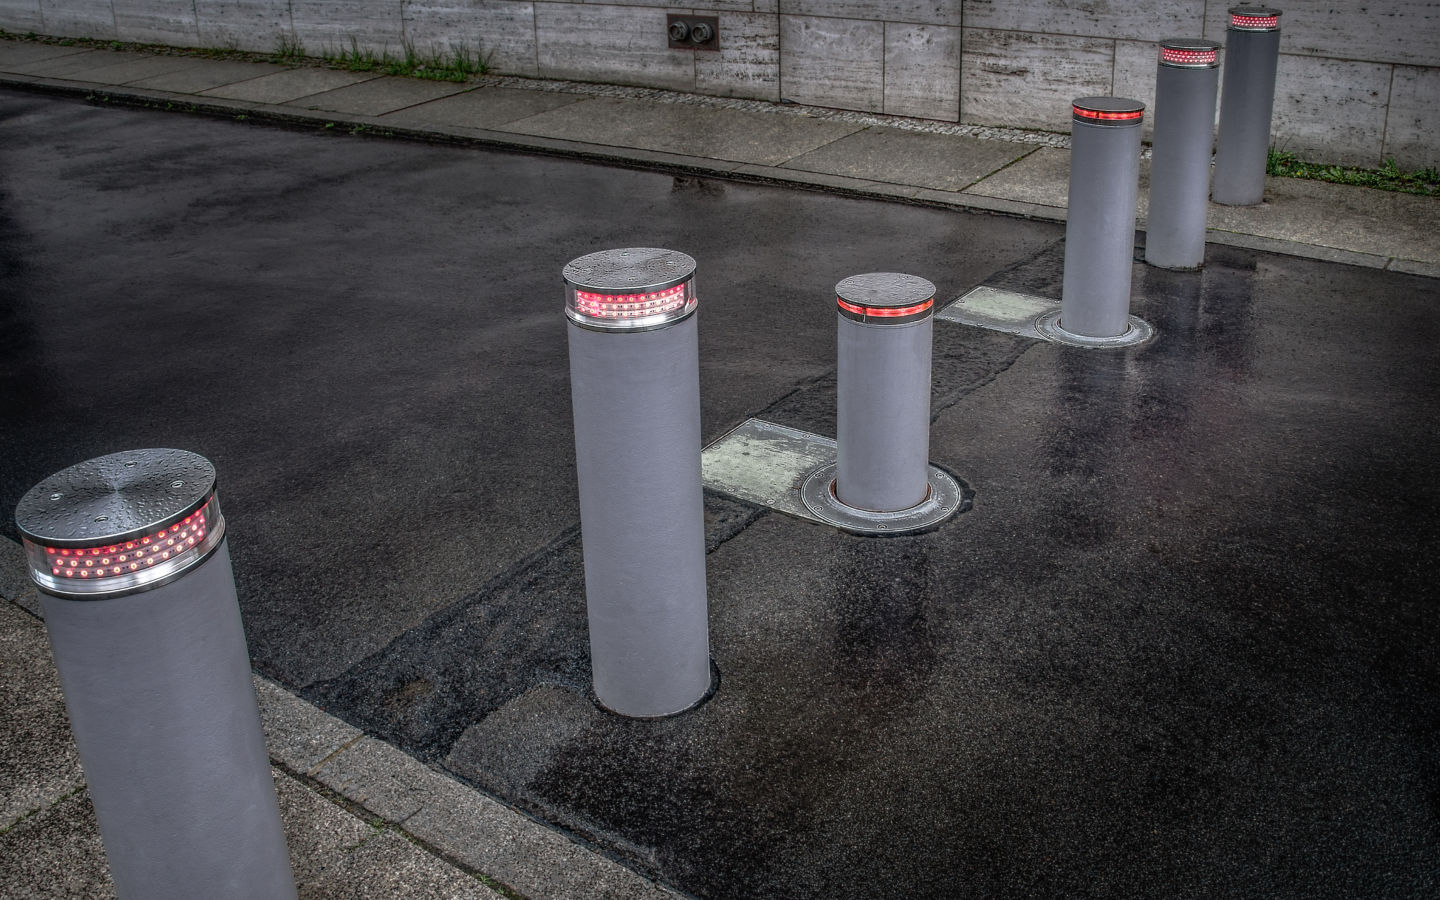 Retractable (lifting) bollards with warning light to enable or block traffic